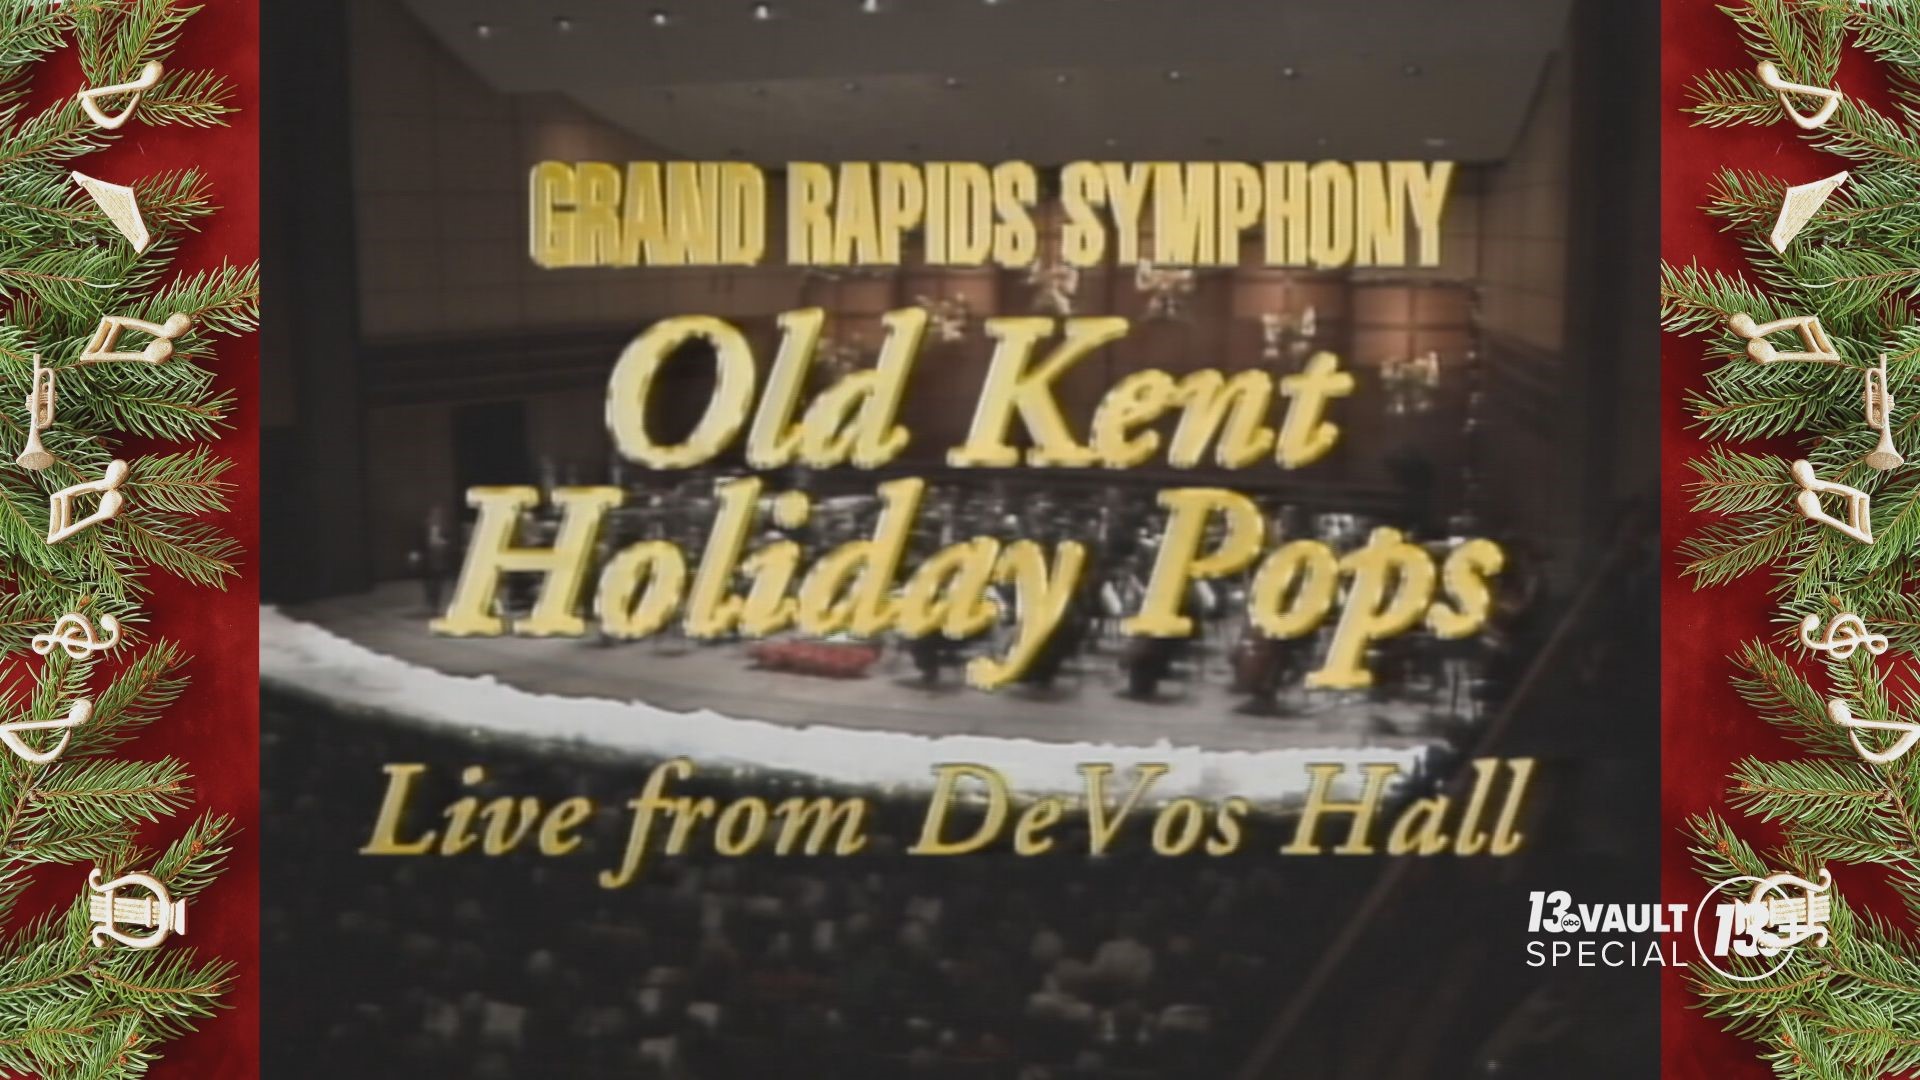 Take a trip back in time to 1995 for the Grand Rapids Symphony's Old Kent Holiday Pops concert live from DeVos Hall. Hosted by Juliet Dragos and Lee Van Ameyde.